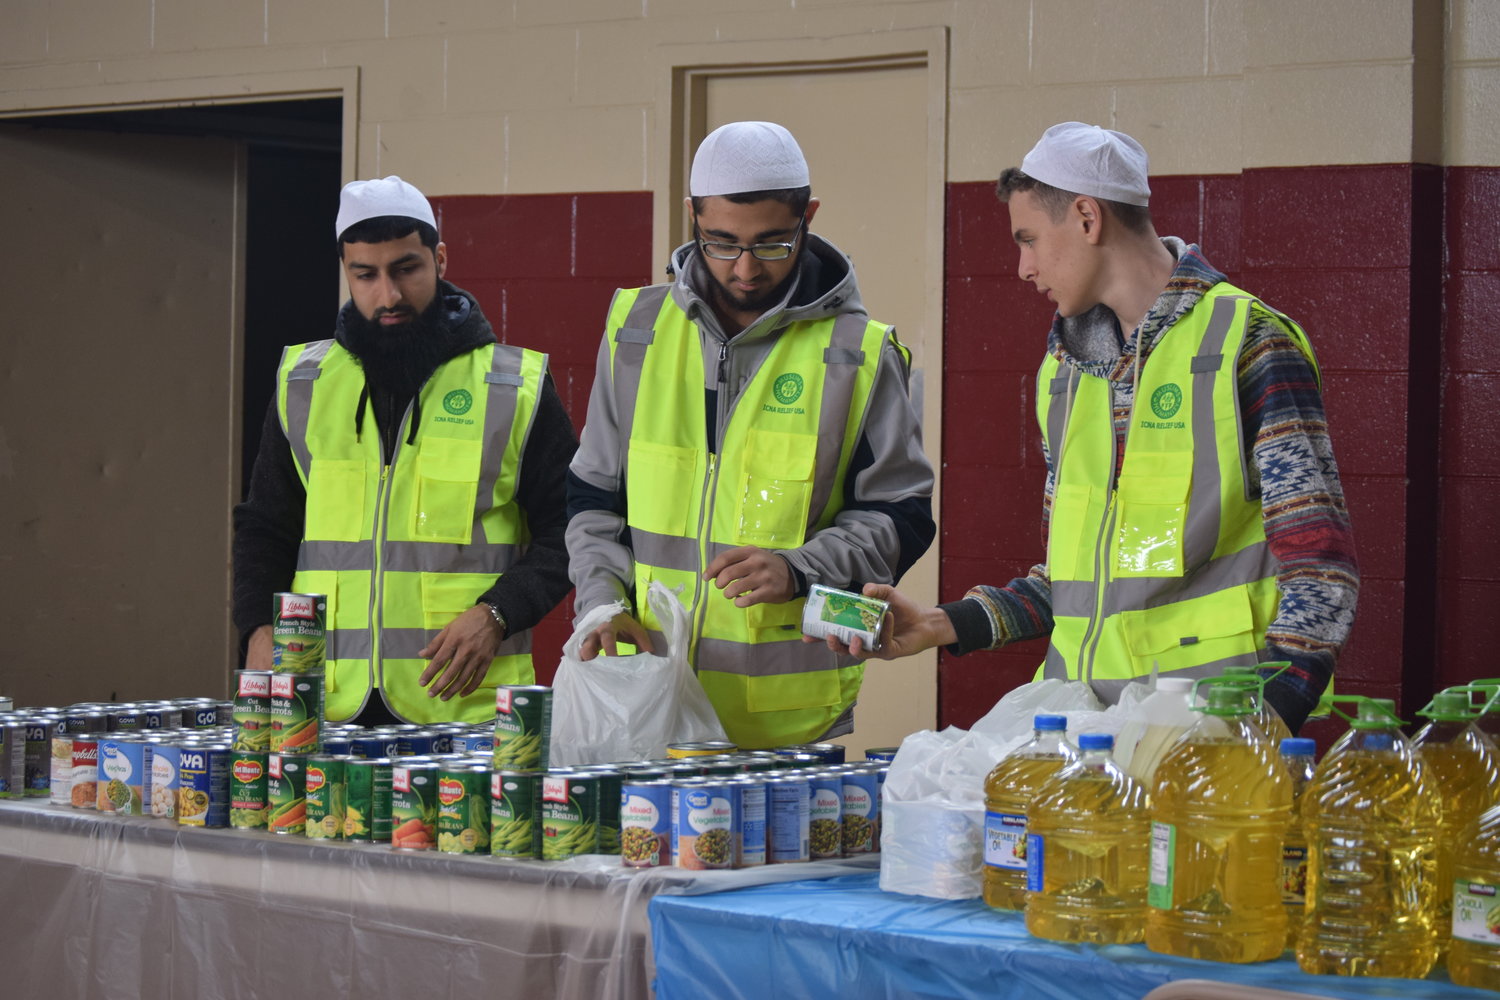 ICNA Relief volunteers Umar Chaudry, Addullah Qureshi and Taib Iraqui-Houssain put out the canned goods at the holiday giveaway.